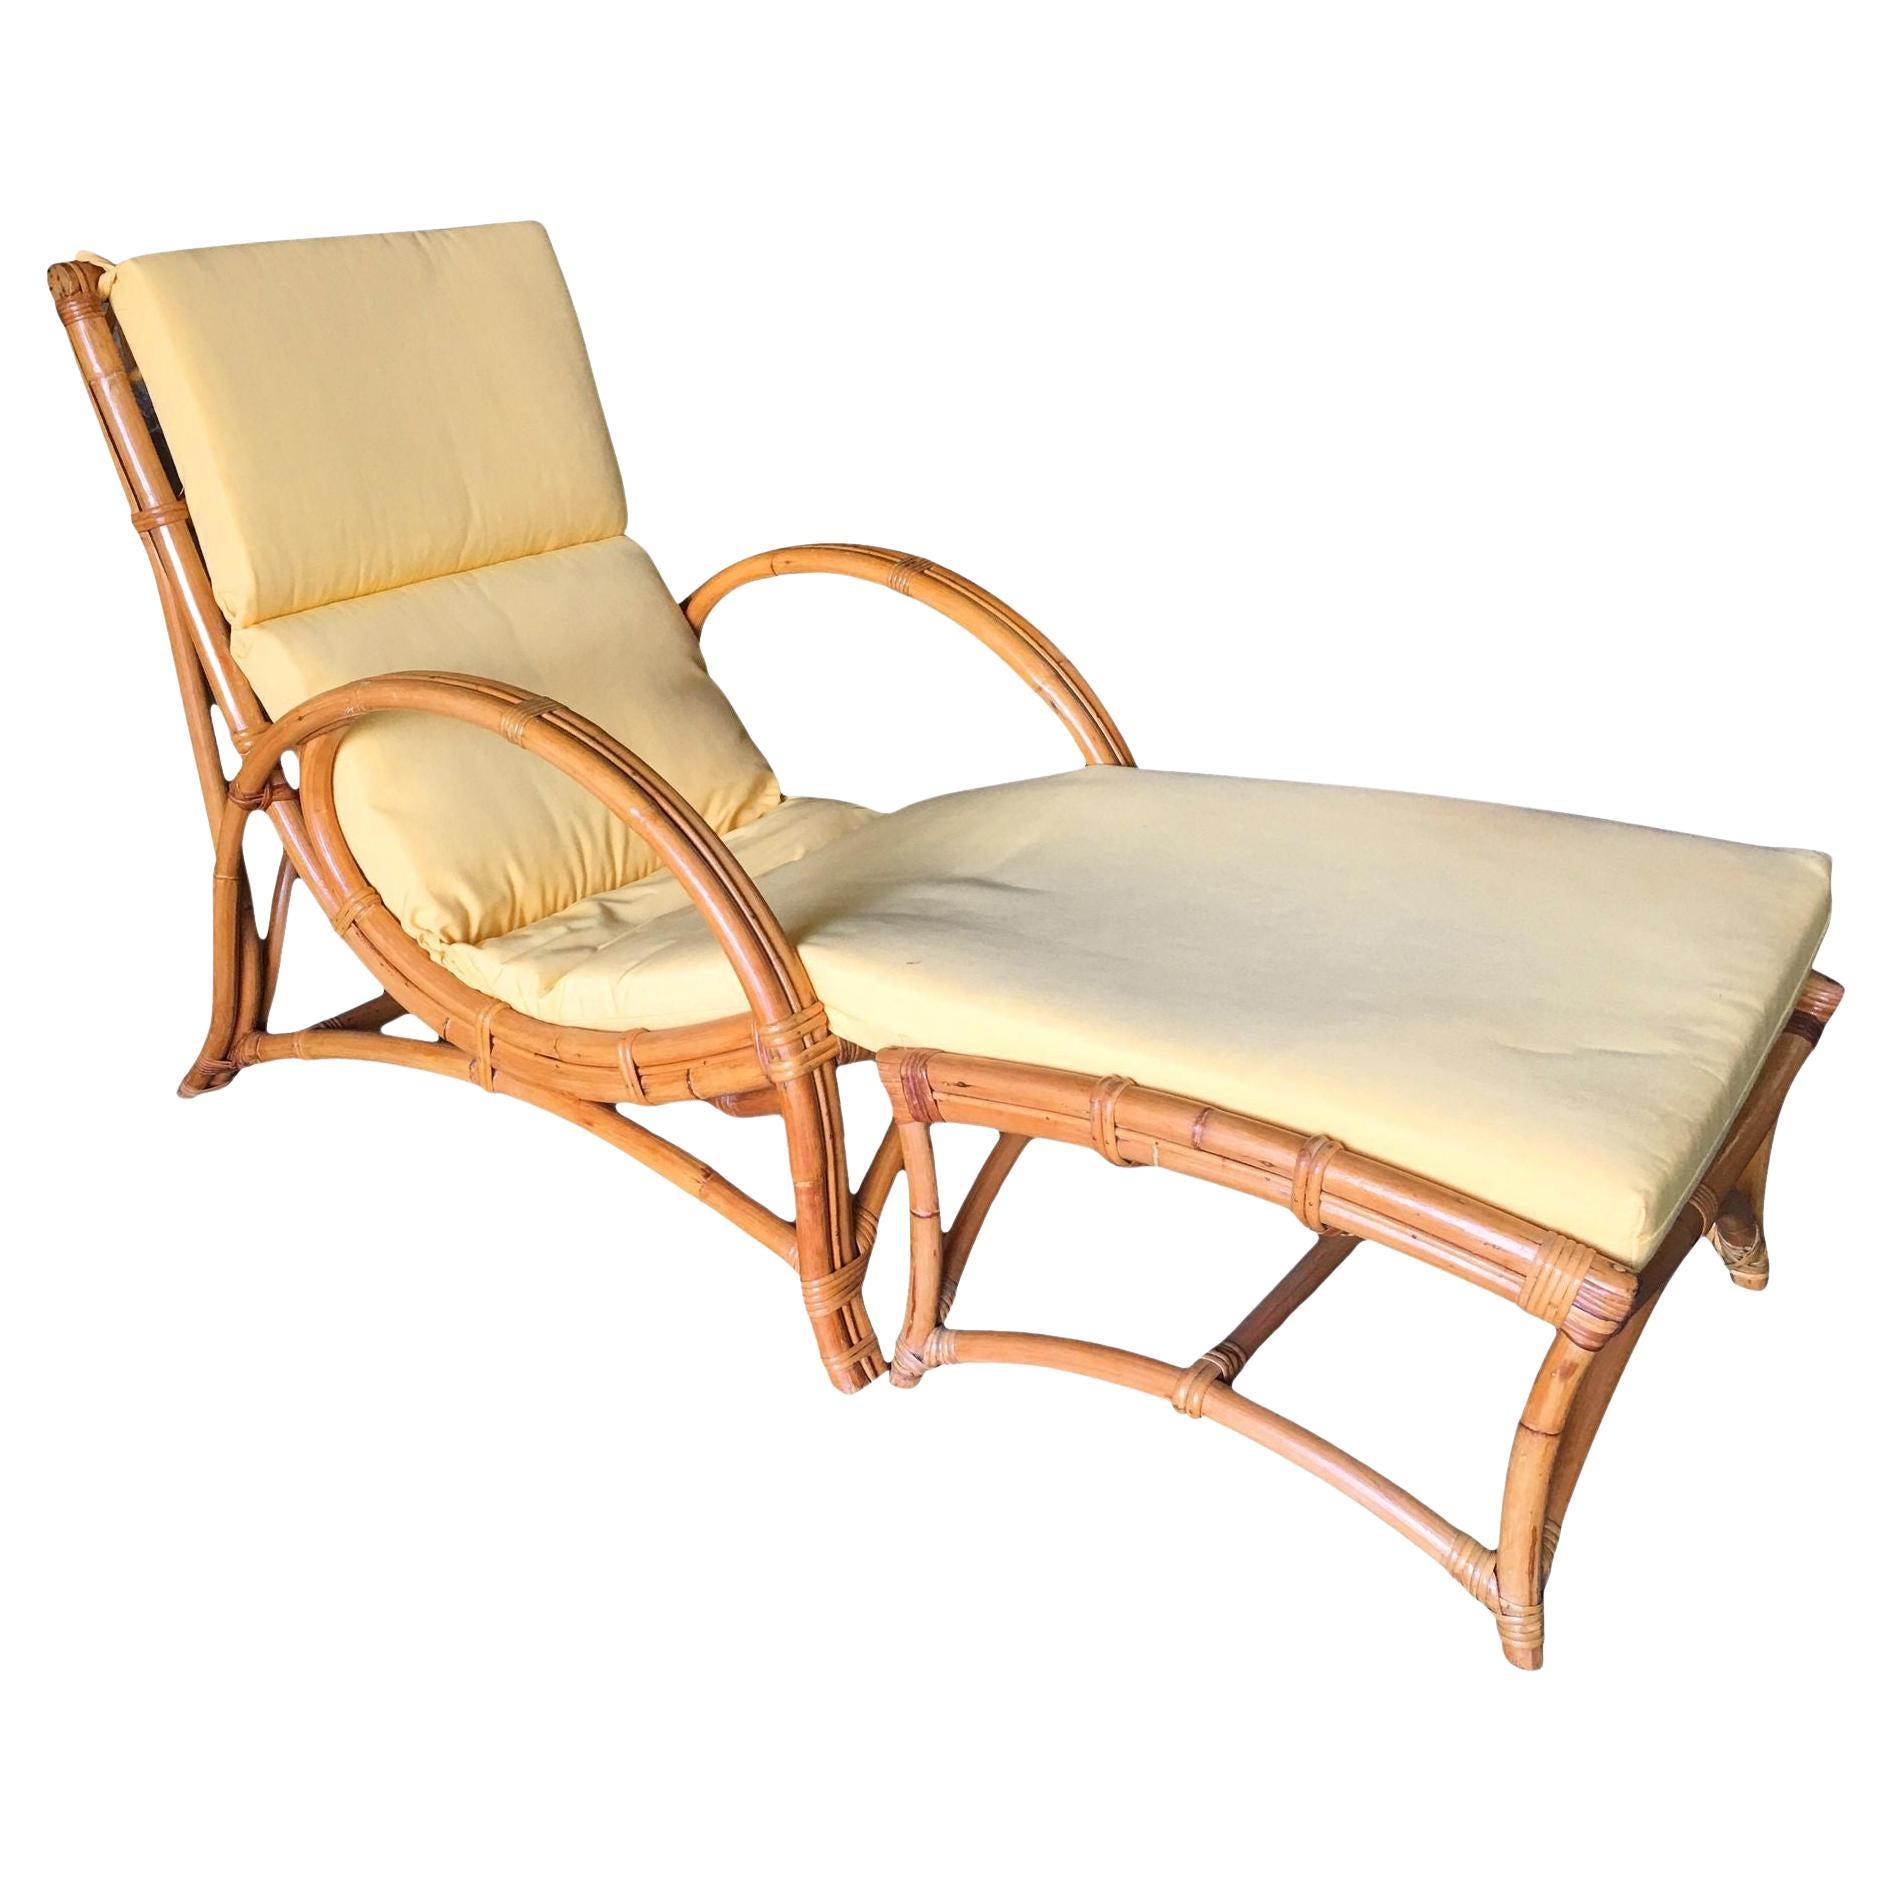 Restored Two-Strand Slope Seat Rattan Chaise Lounge With Ottoman